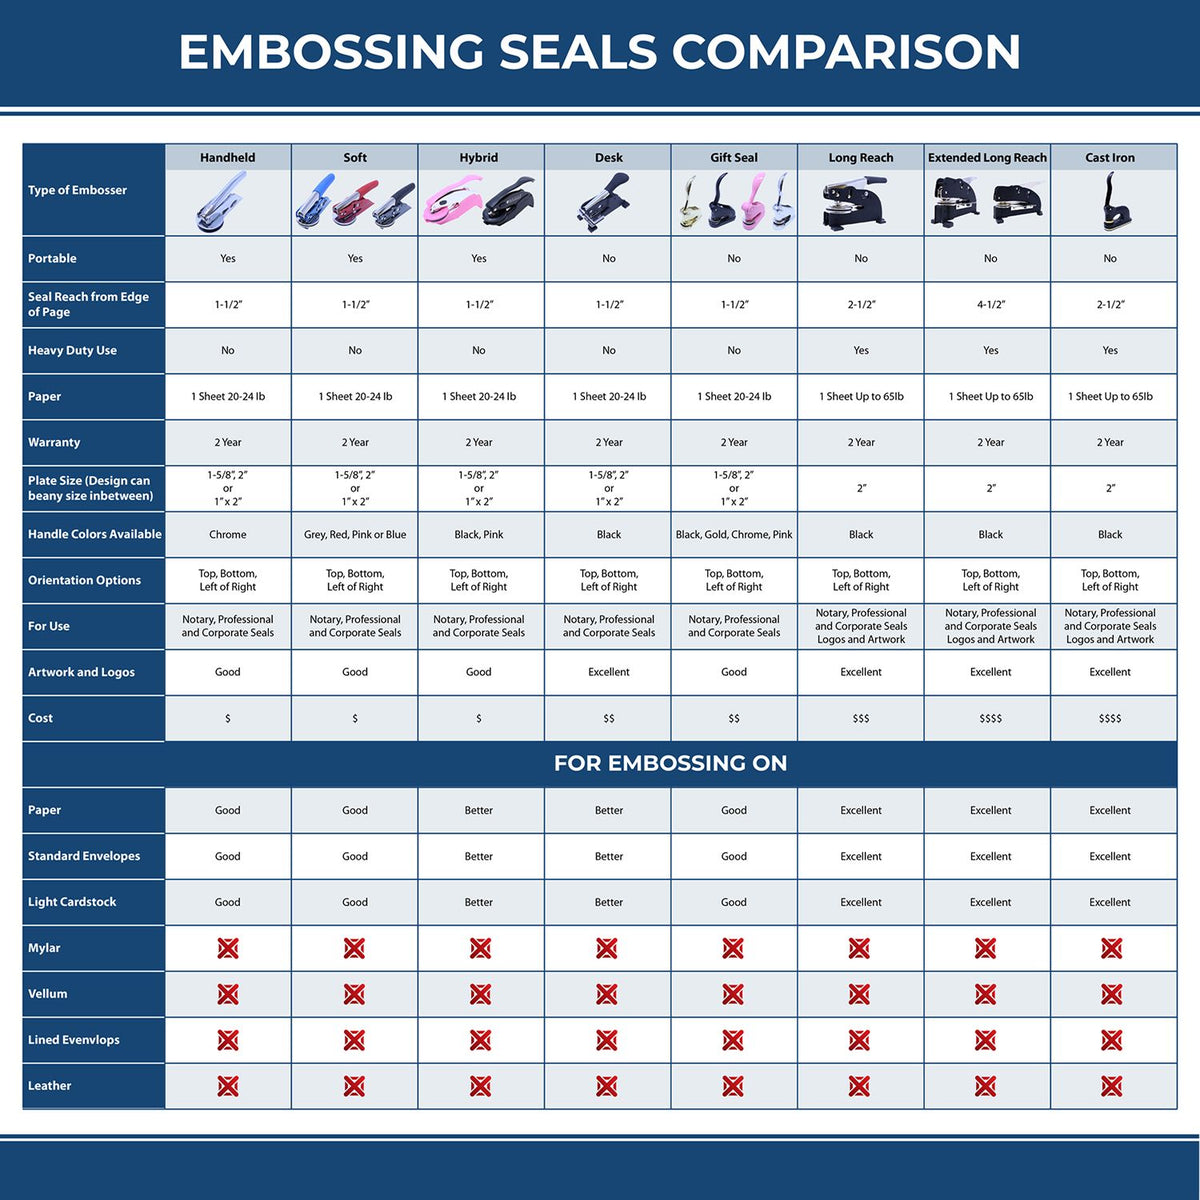 A comparison chart for the different types of mount models available for the Extended Long Reach Arkansas Surveyor Embosser.